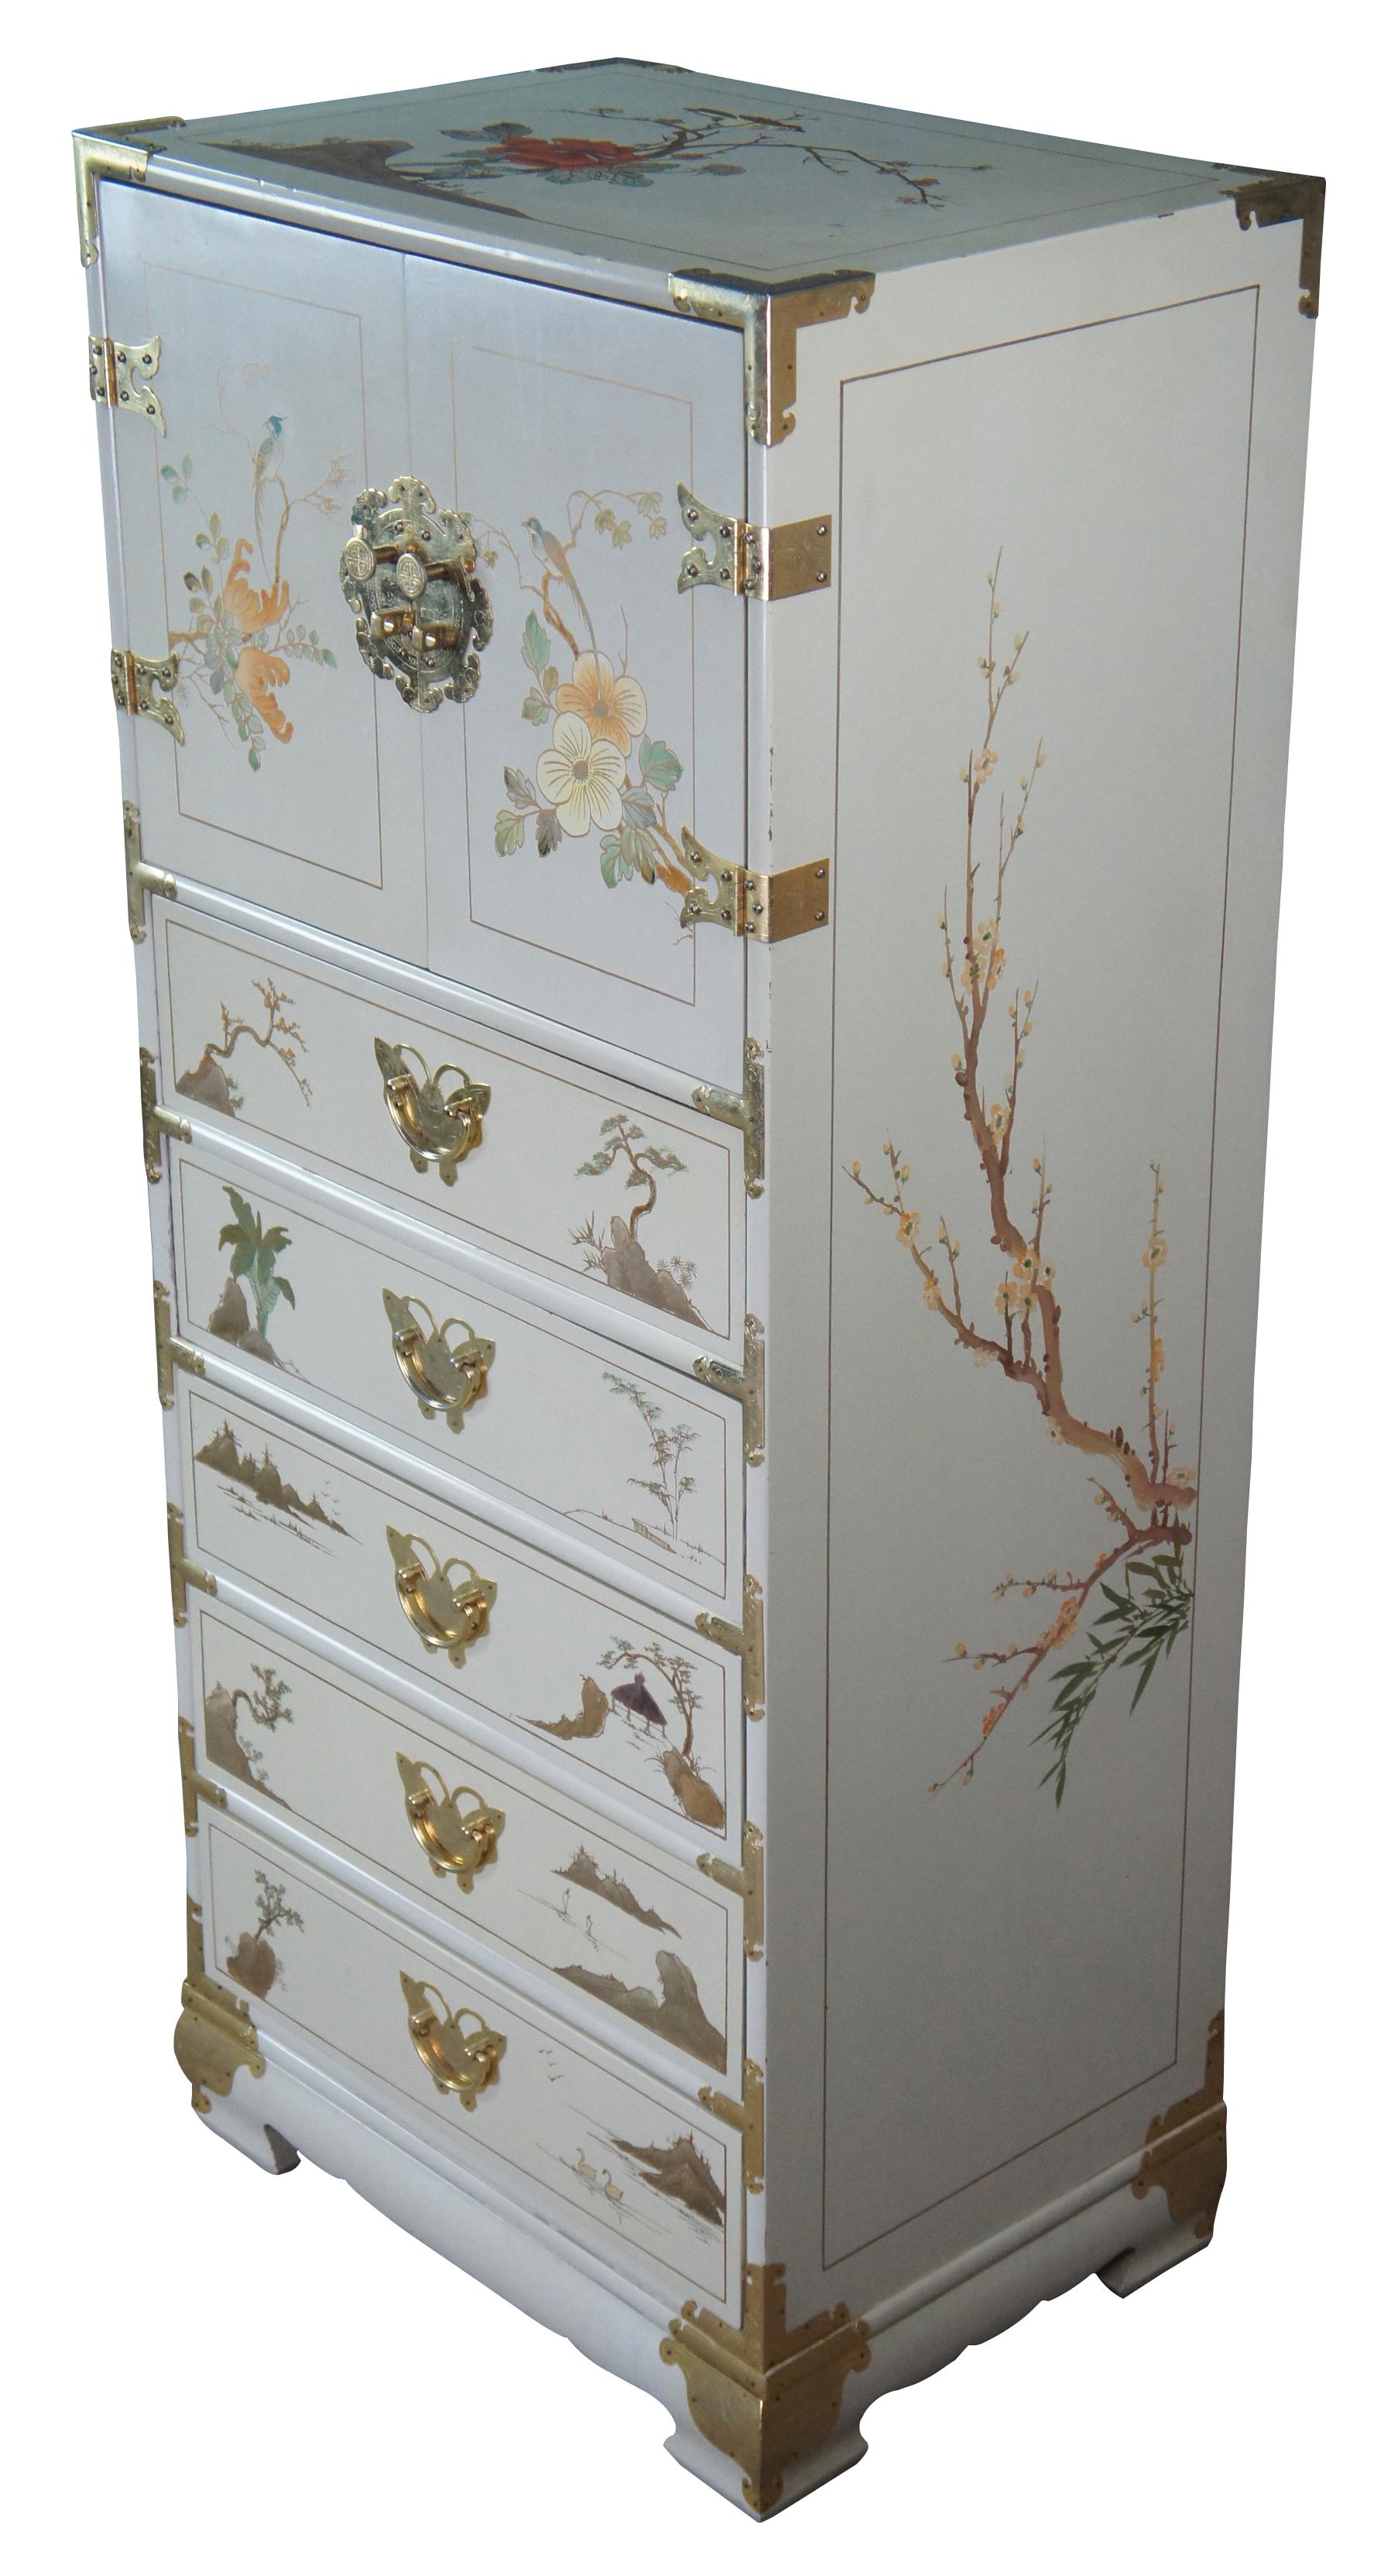 Chinese jewelry armoire, chest or dresser featuring hand painted detail of pagodas, landscapes, birds, and florals with brass banded accents and butterfly pulls. Circa lst half of 20th century.
 